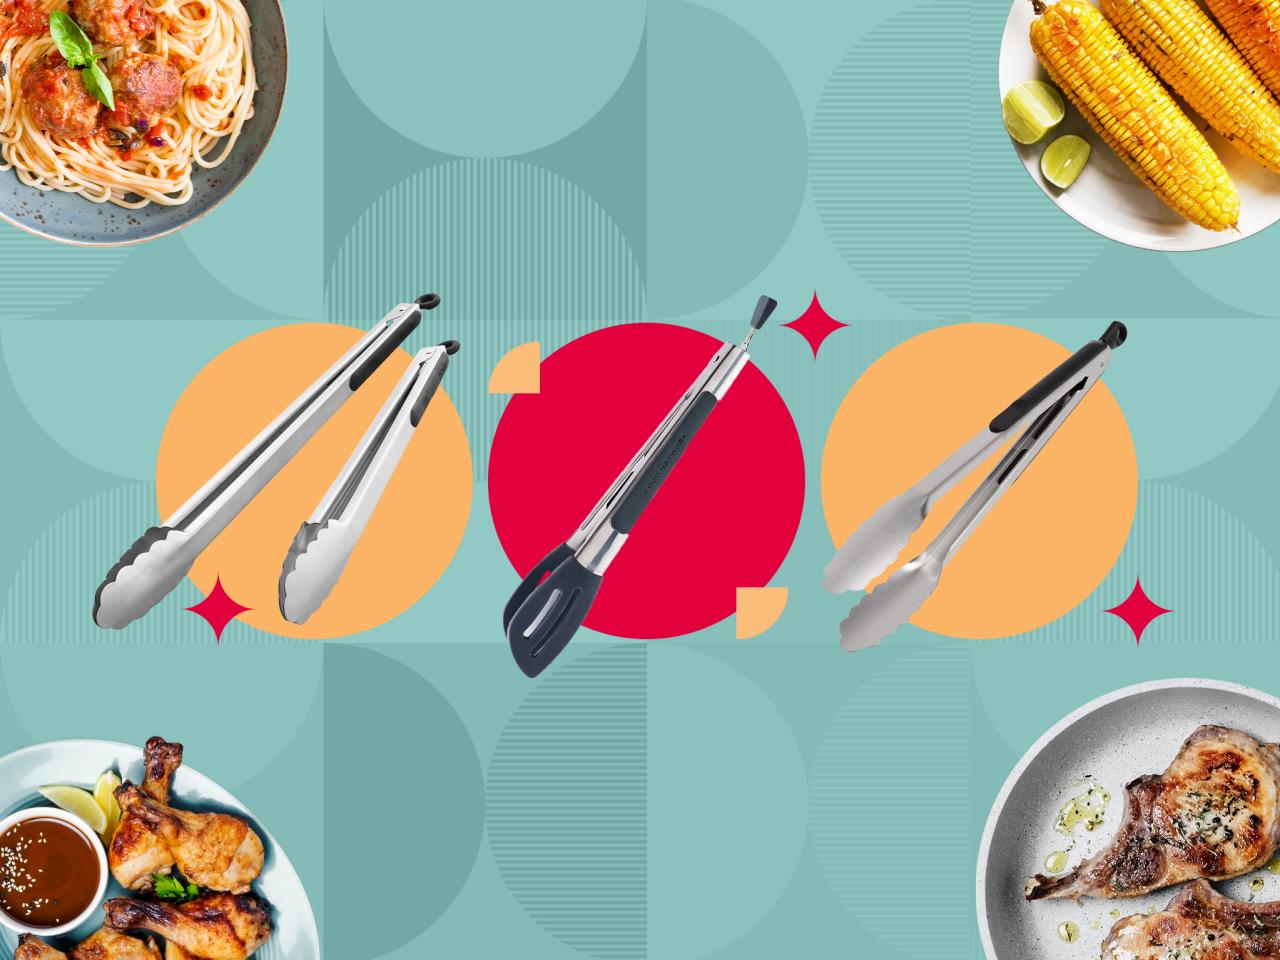 The Cooking Tongs The Bon Appétit Test Kitchen Swears By